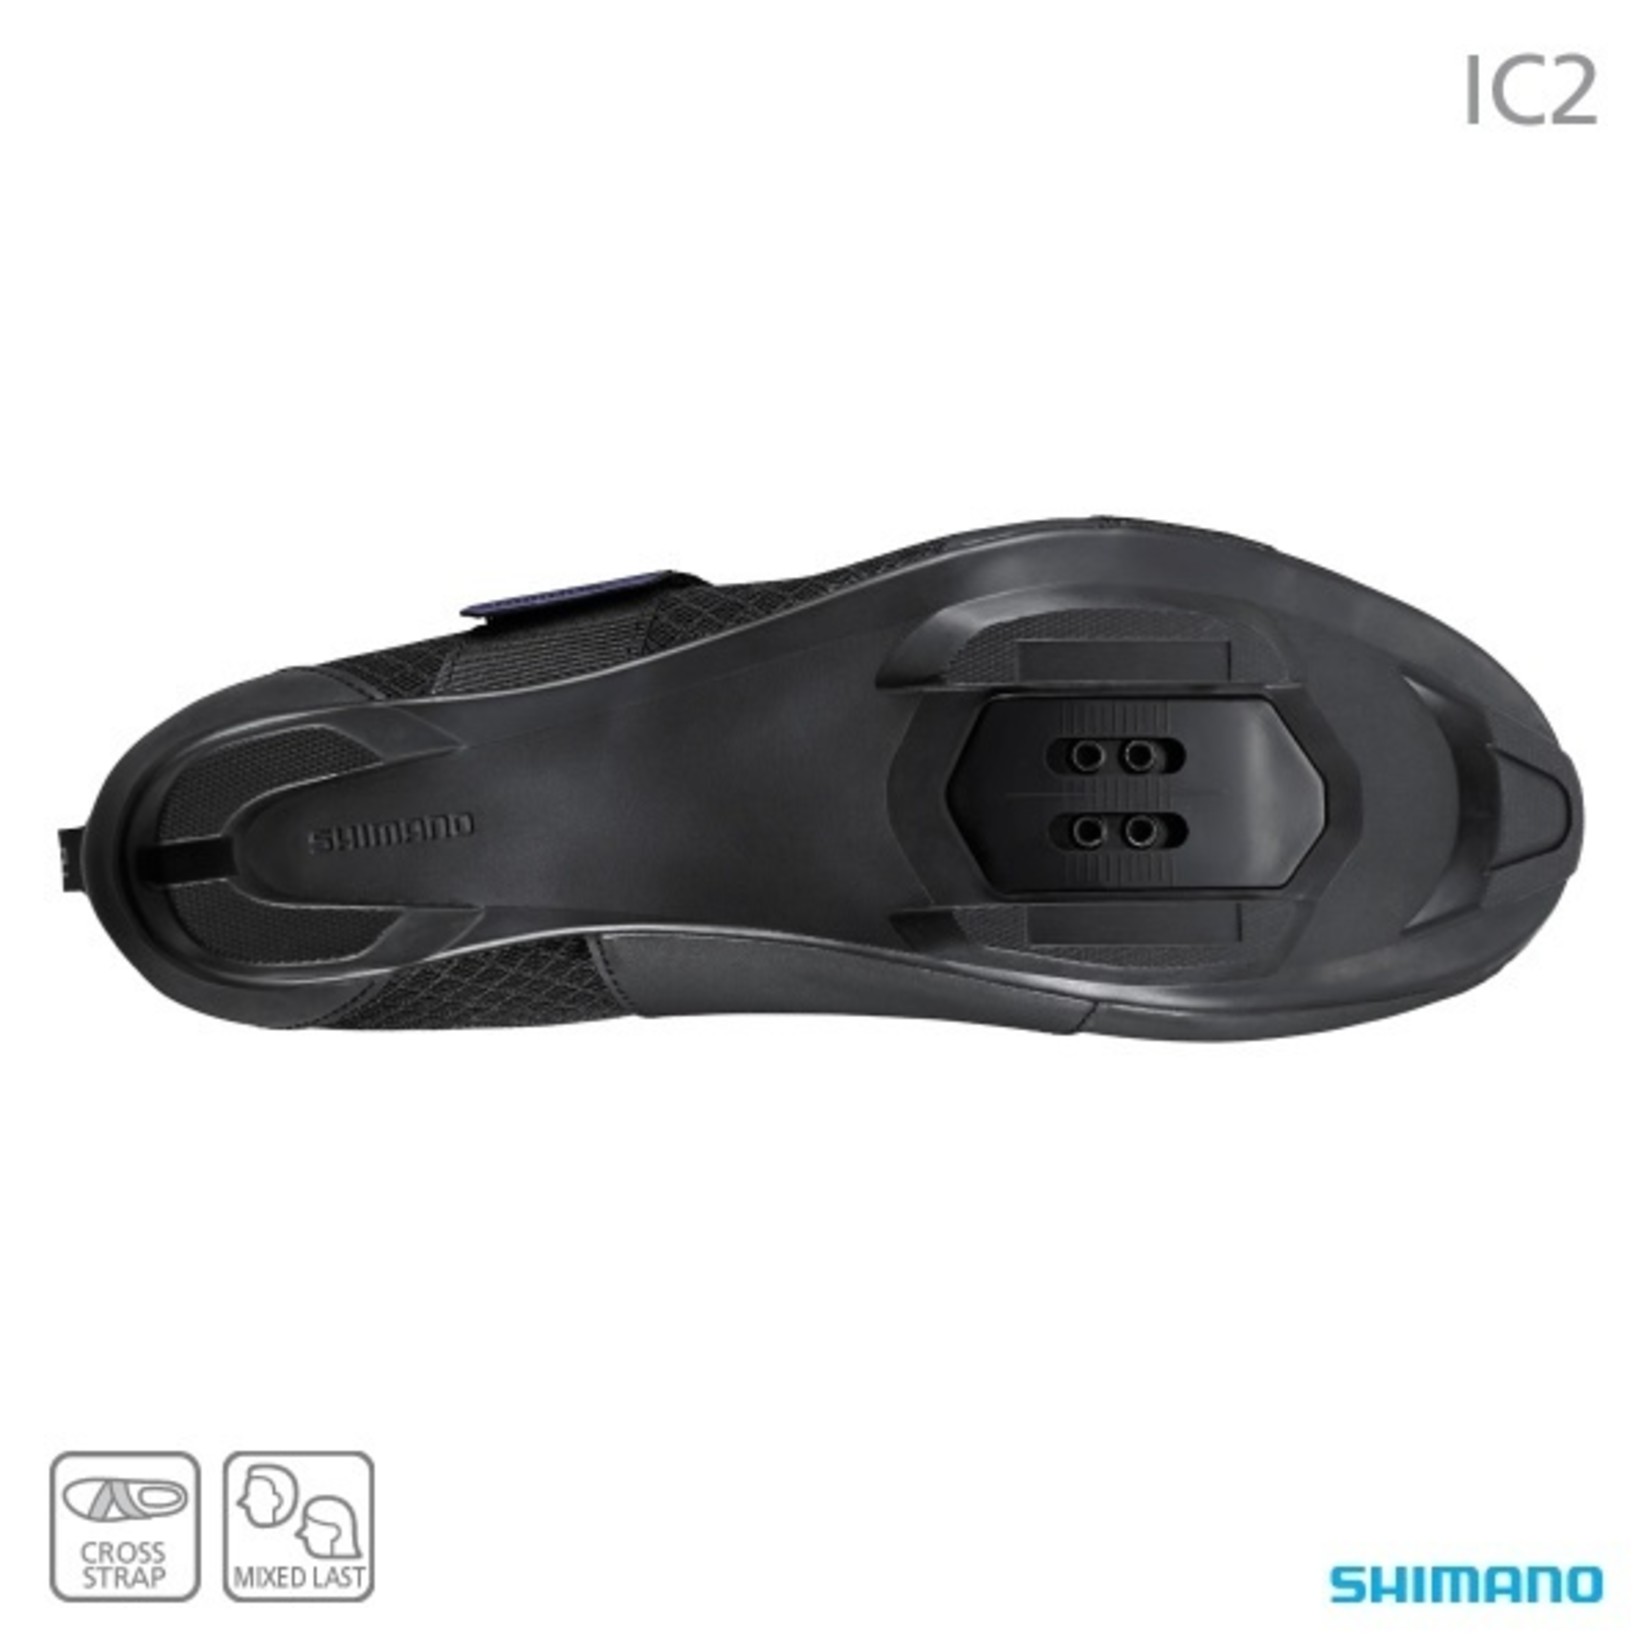 Shimano Shimano SH-IC200 Indoor Cycling Speed Shoes Stable Rubber Sole - Black